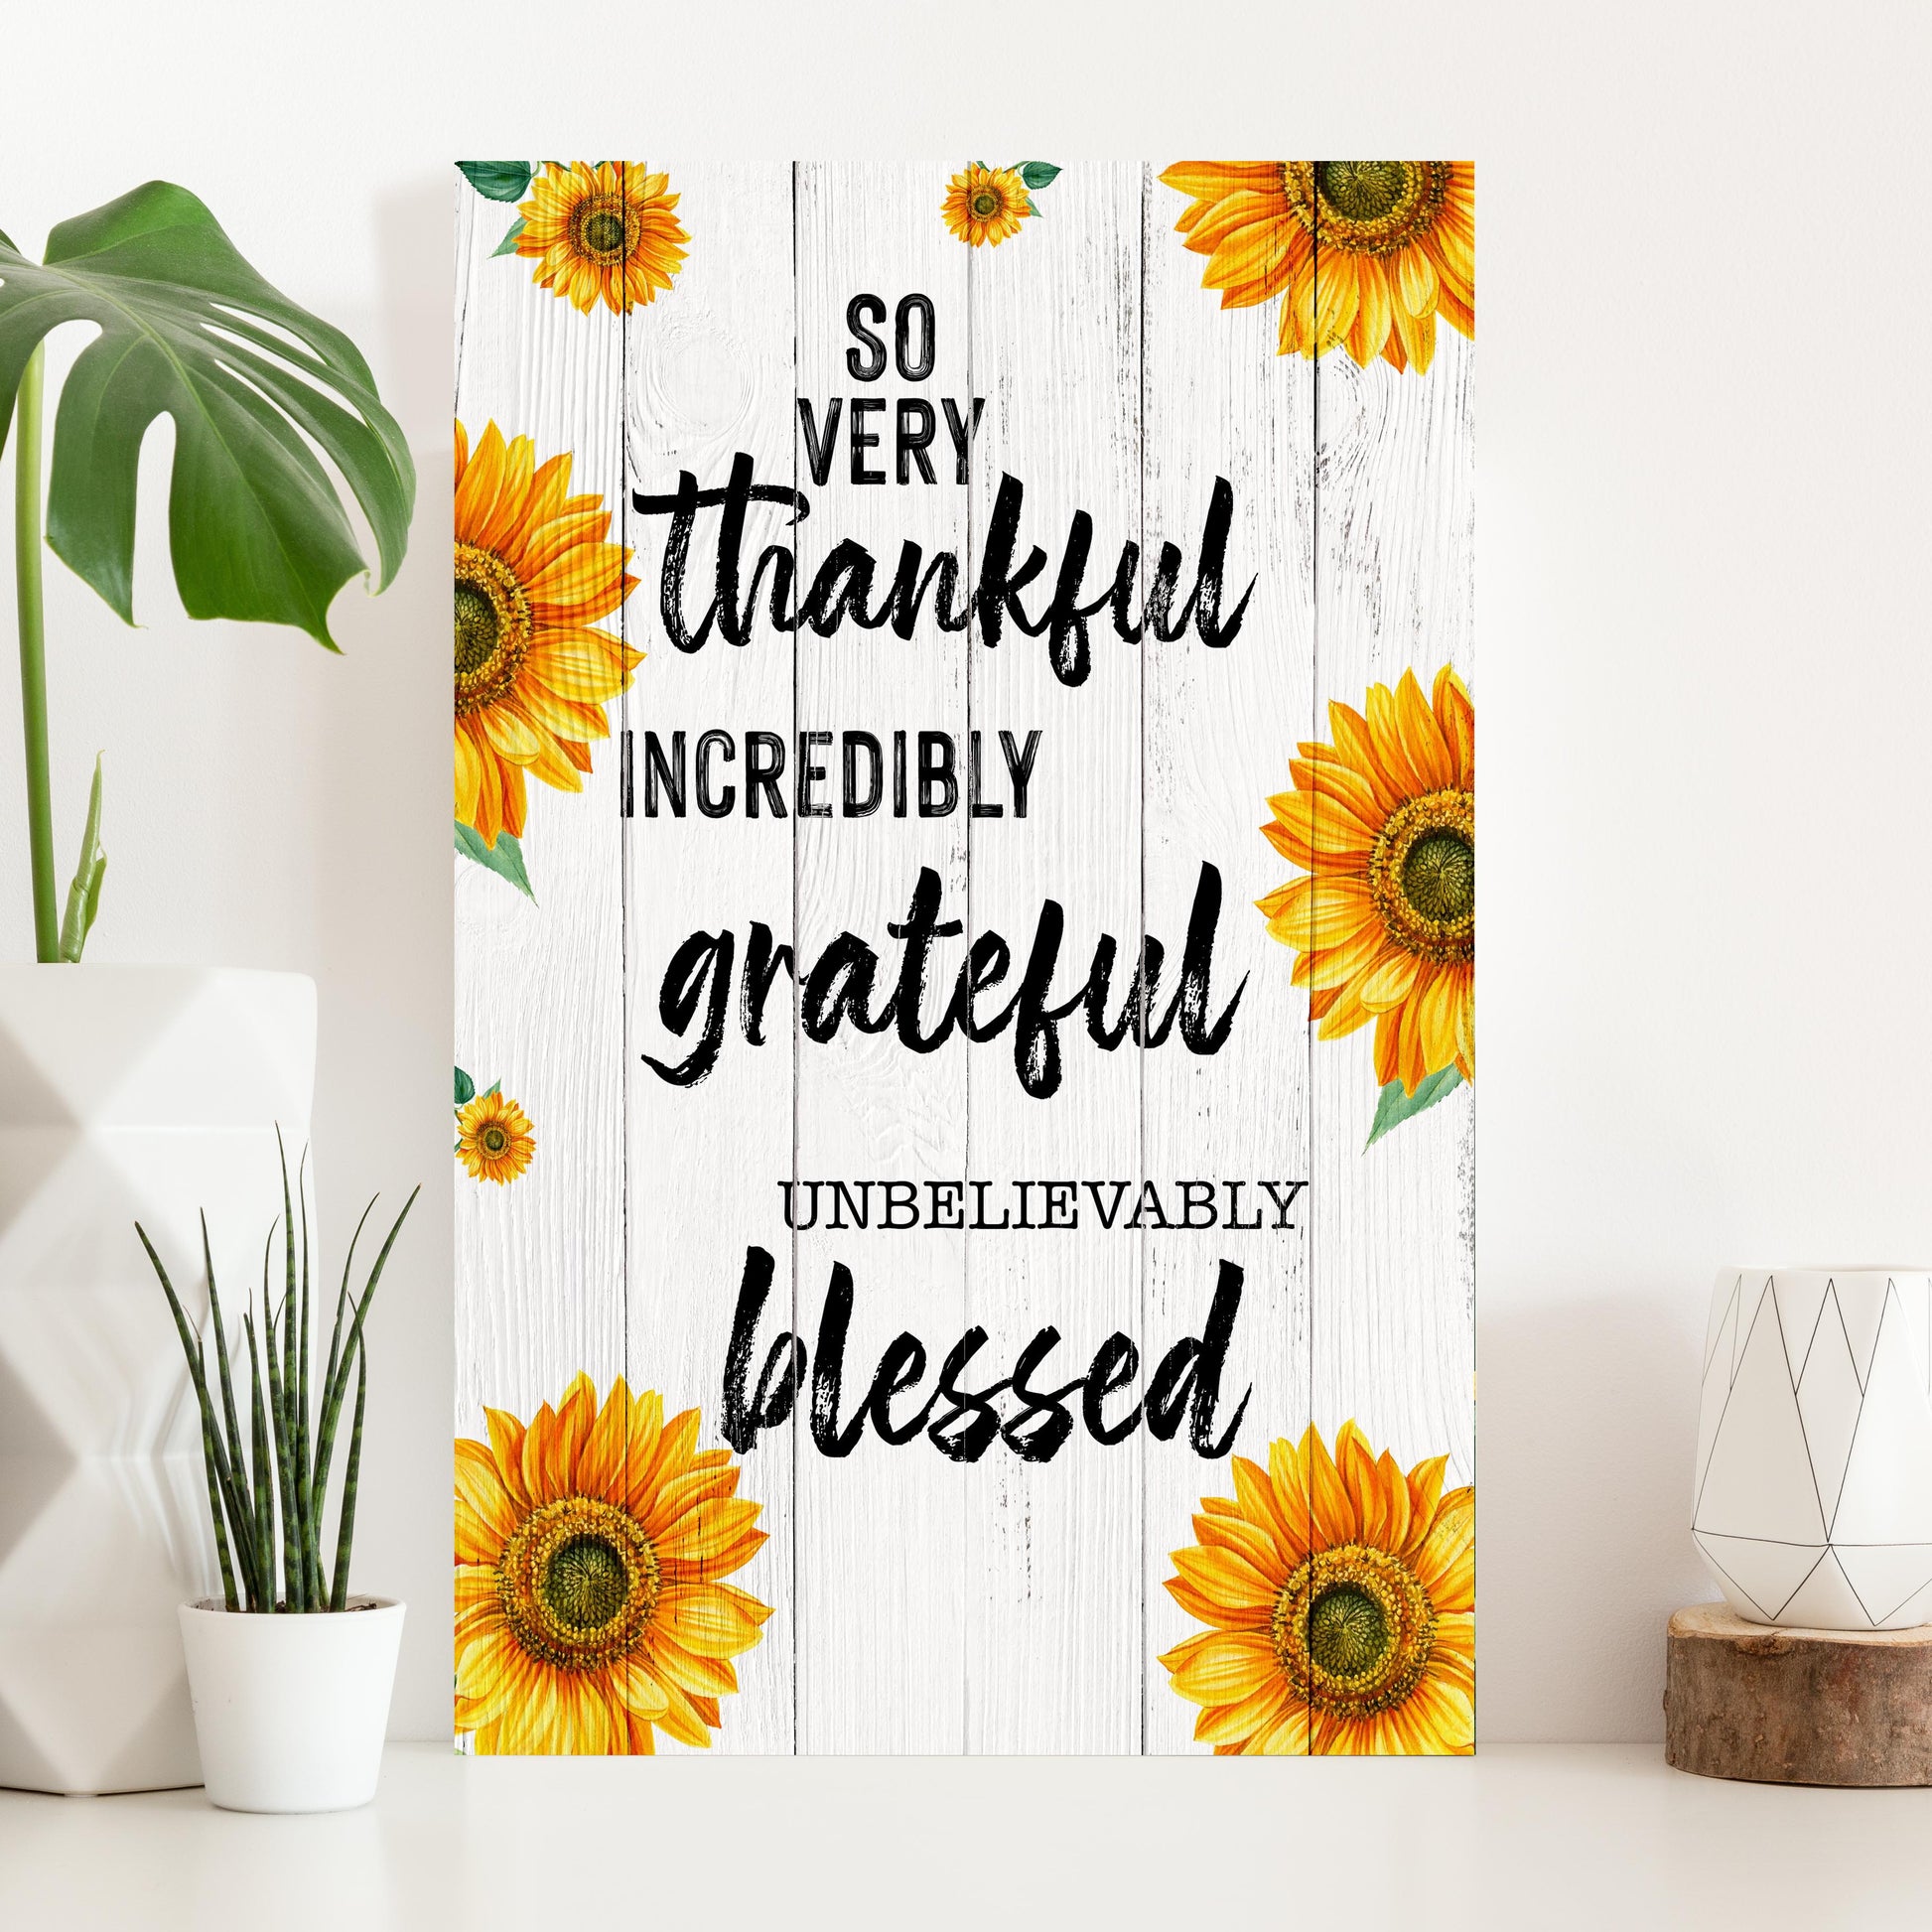 Thankful Grateful Blessed Sign II - Image by Tailored Canvases